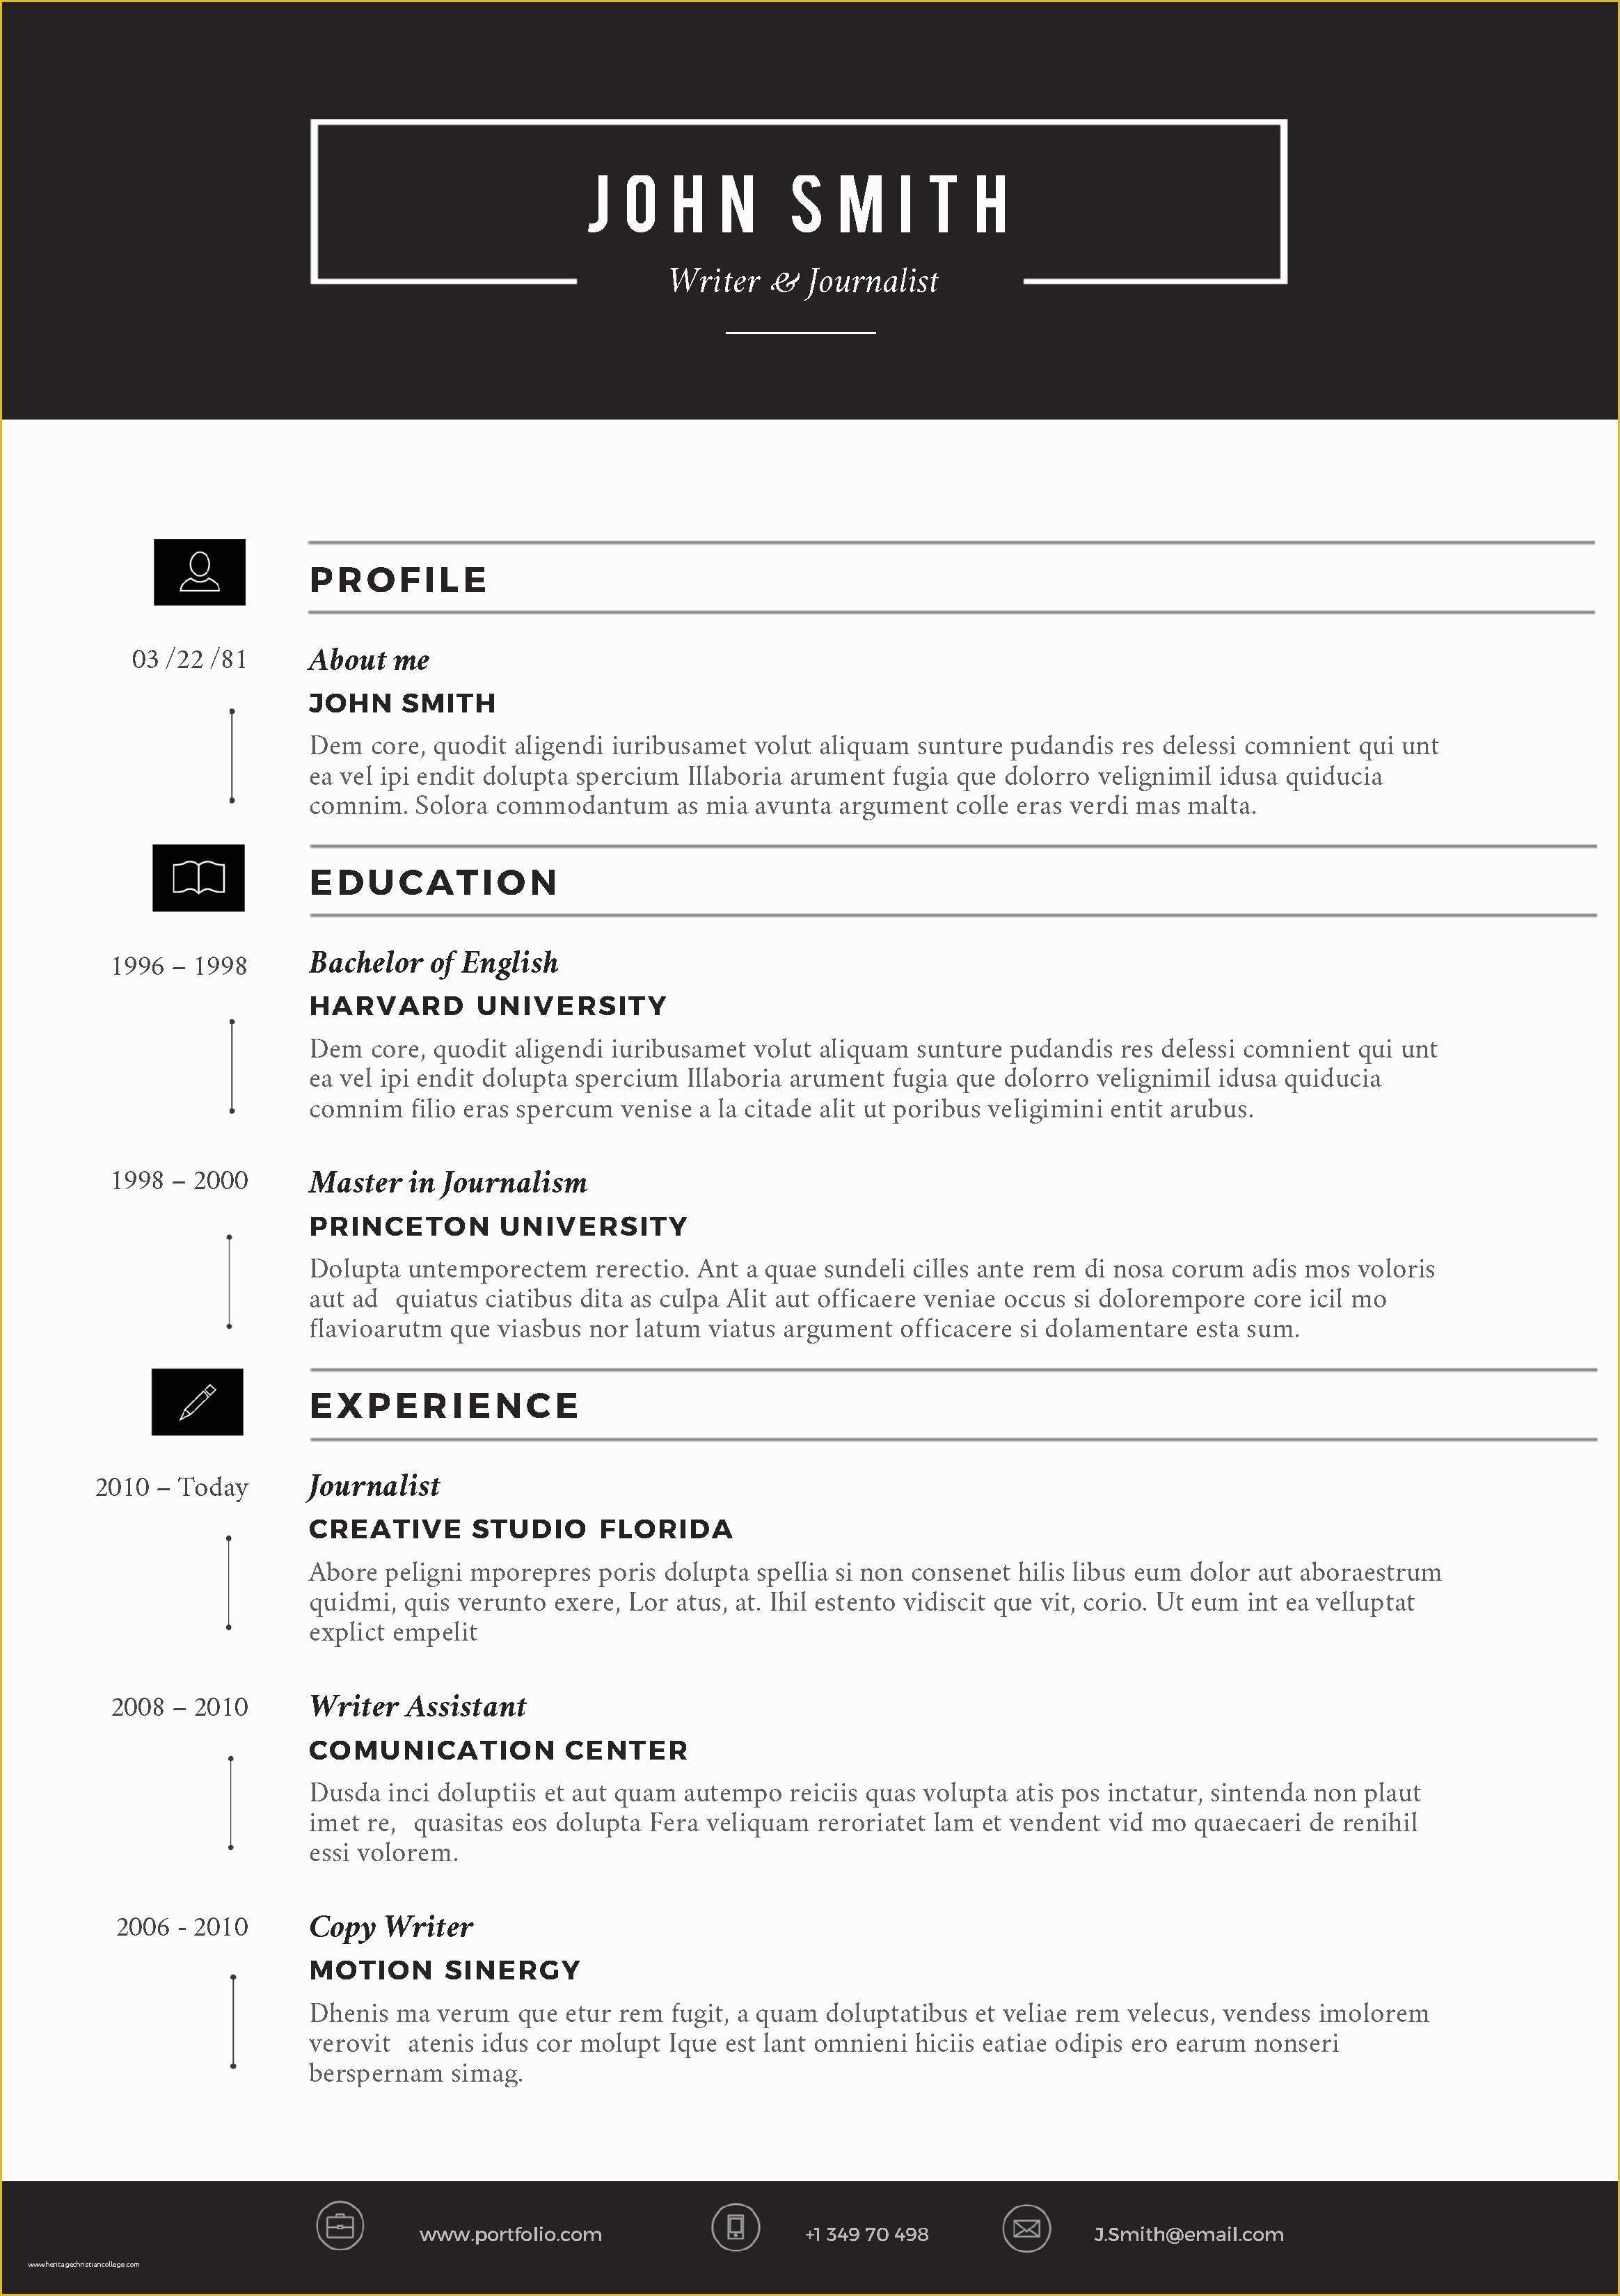 Free Apple Pages Resume Templates Of Resume Templates for Pages Mac New Resume Cv Apple Resume